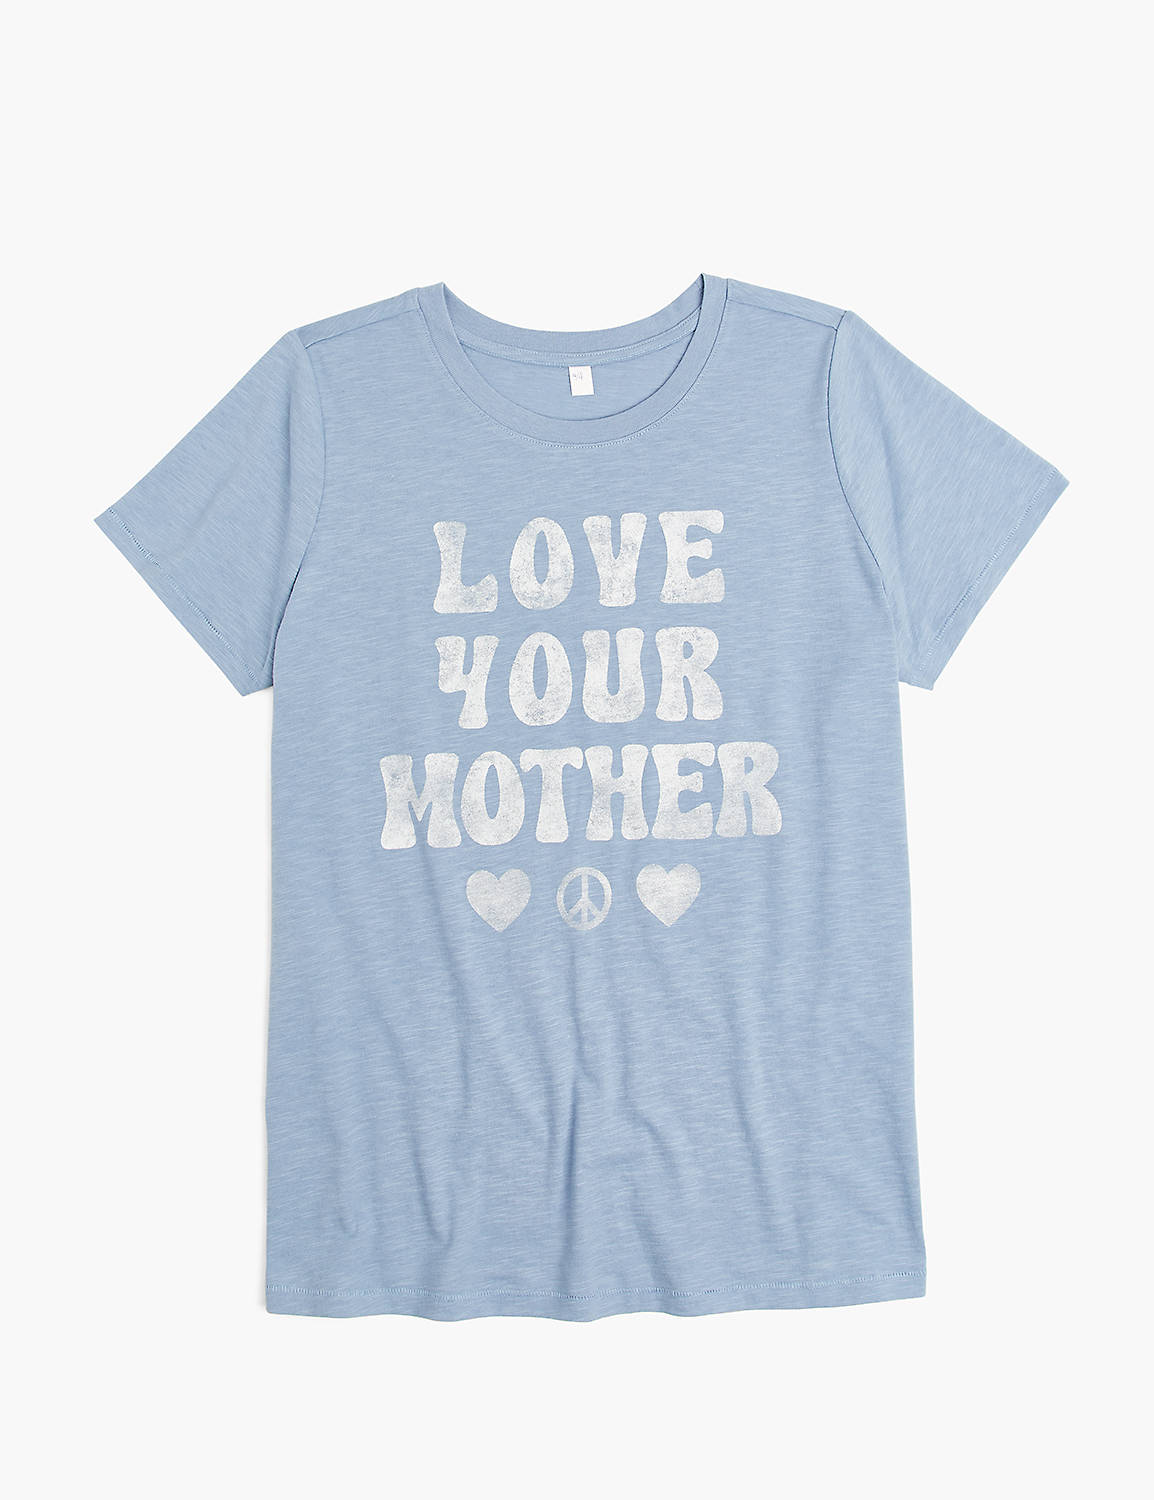 lane bryant modern love your mother graphic tee 14/16 faded denim